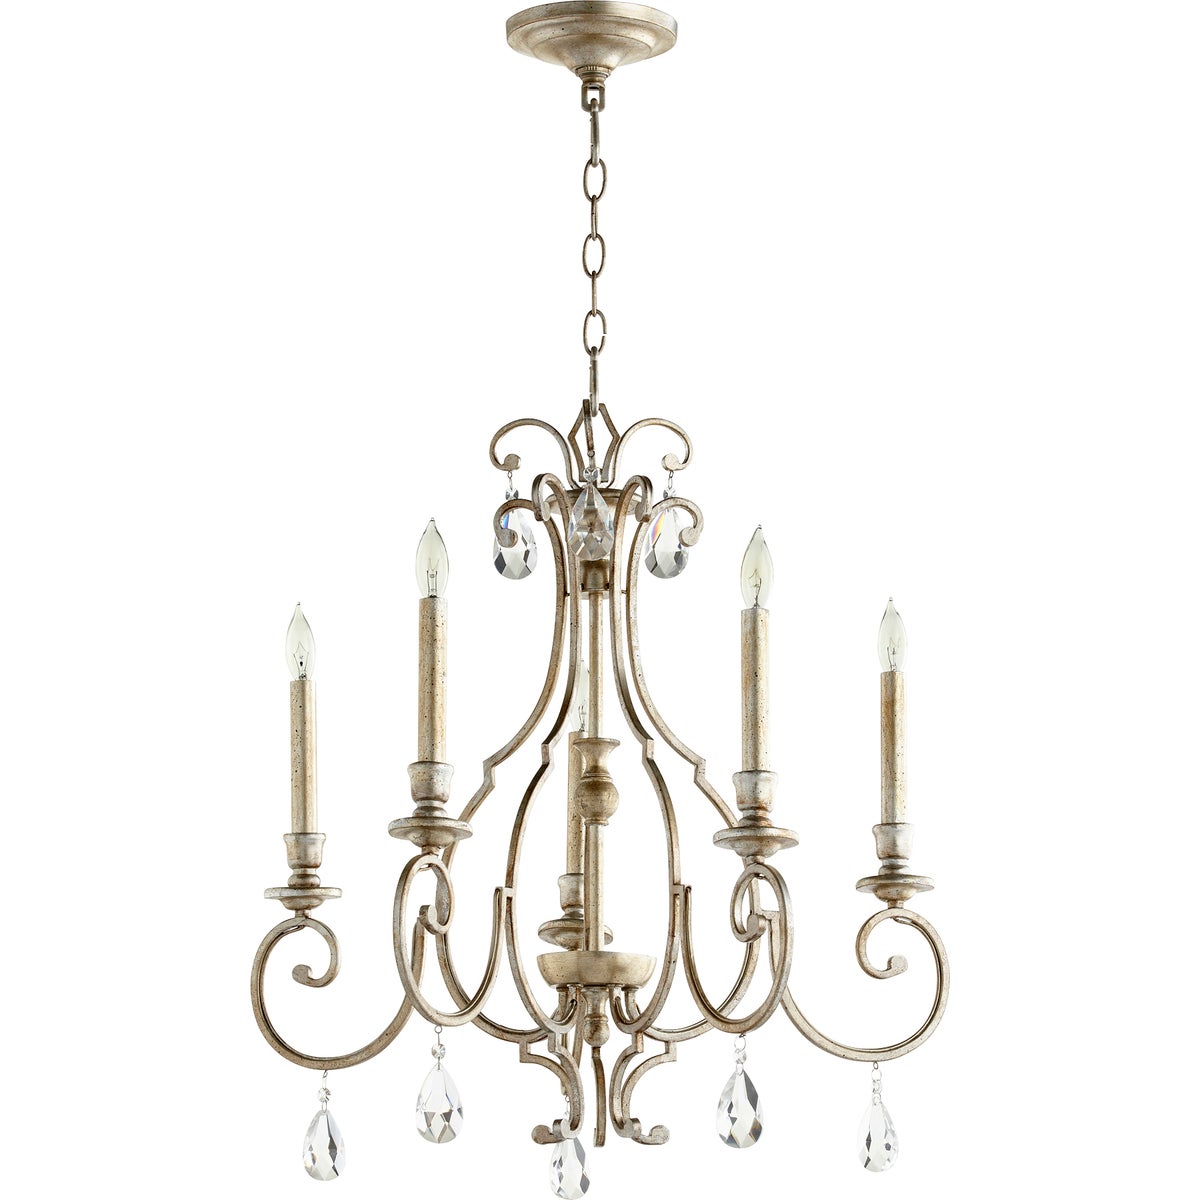 Bedroom chandelier with crystal lights, combining traditional frame and elegant ornamentation. A statement piece that adds a touch of history to your décor.